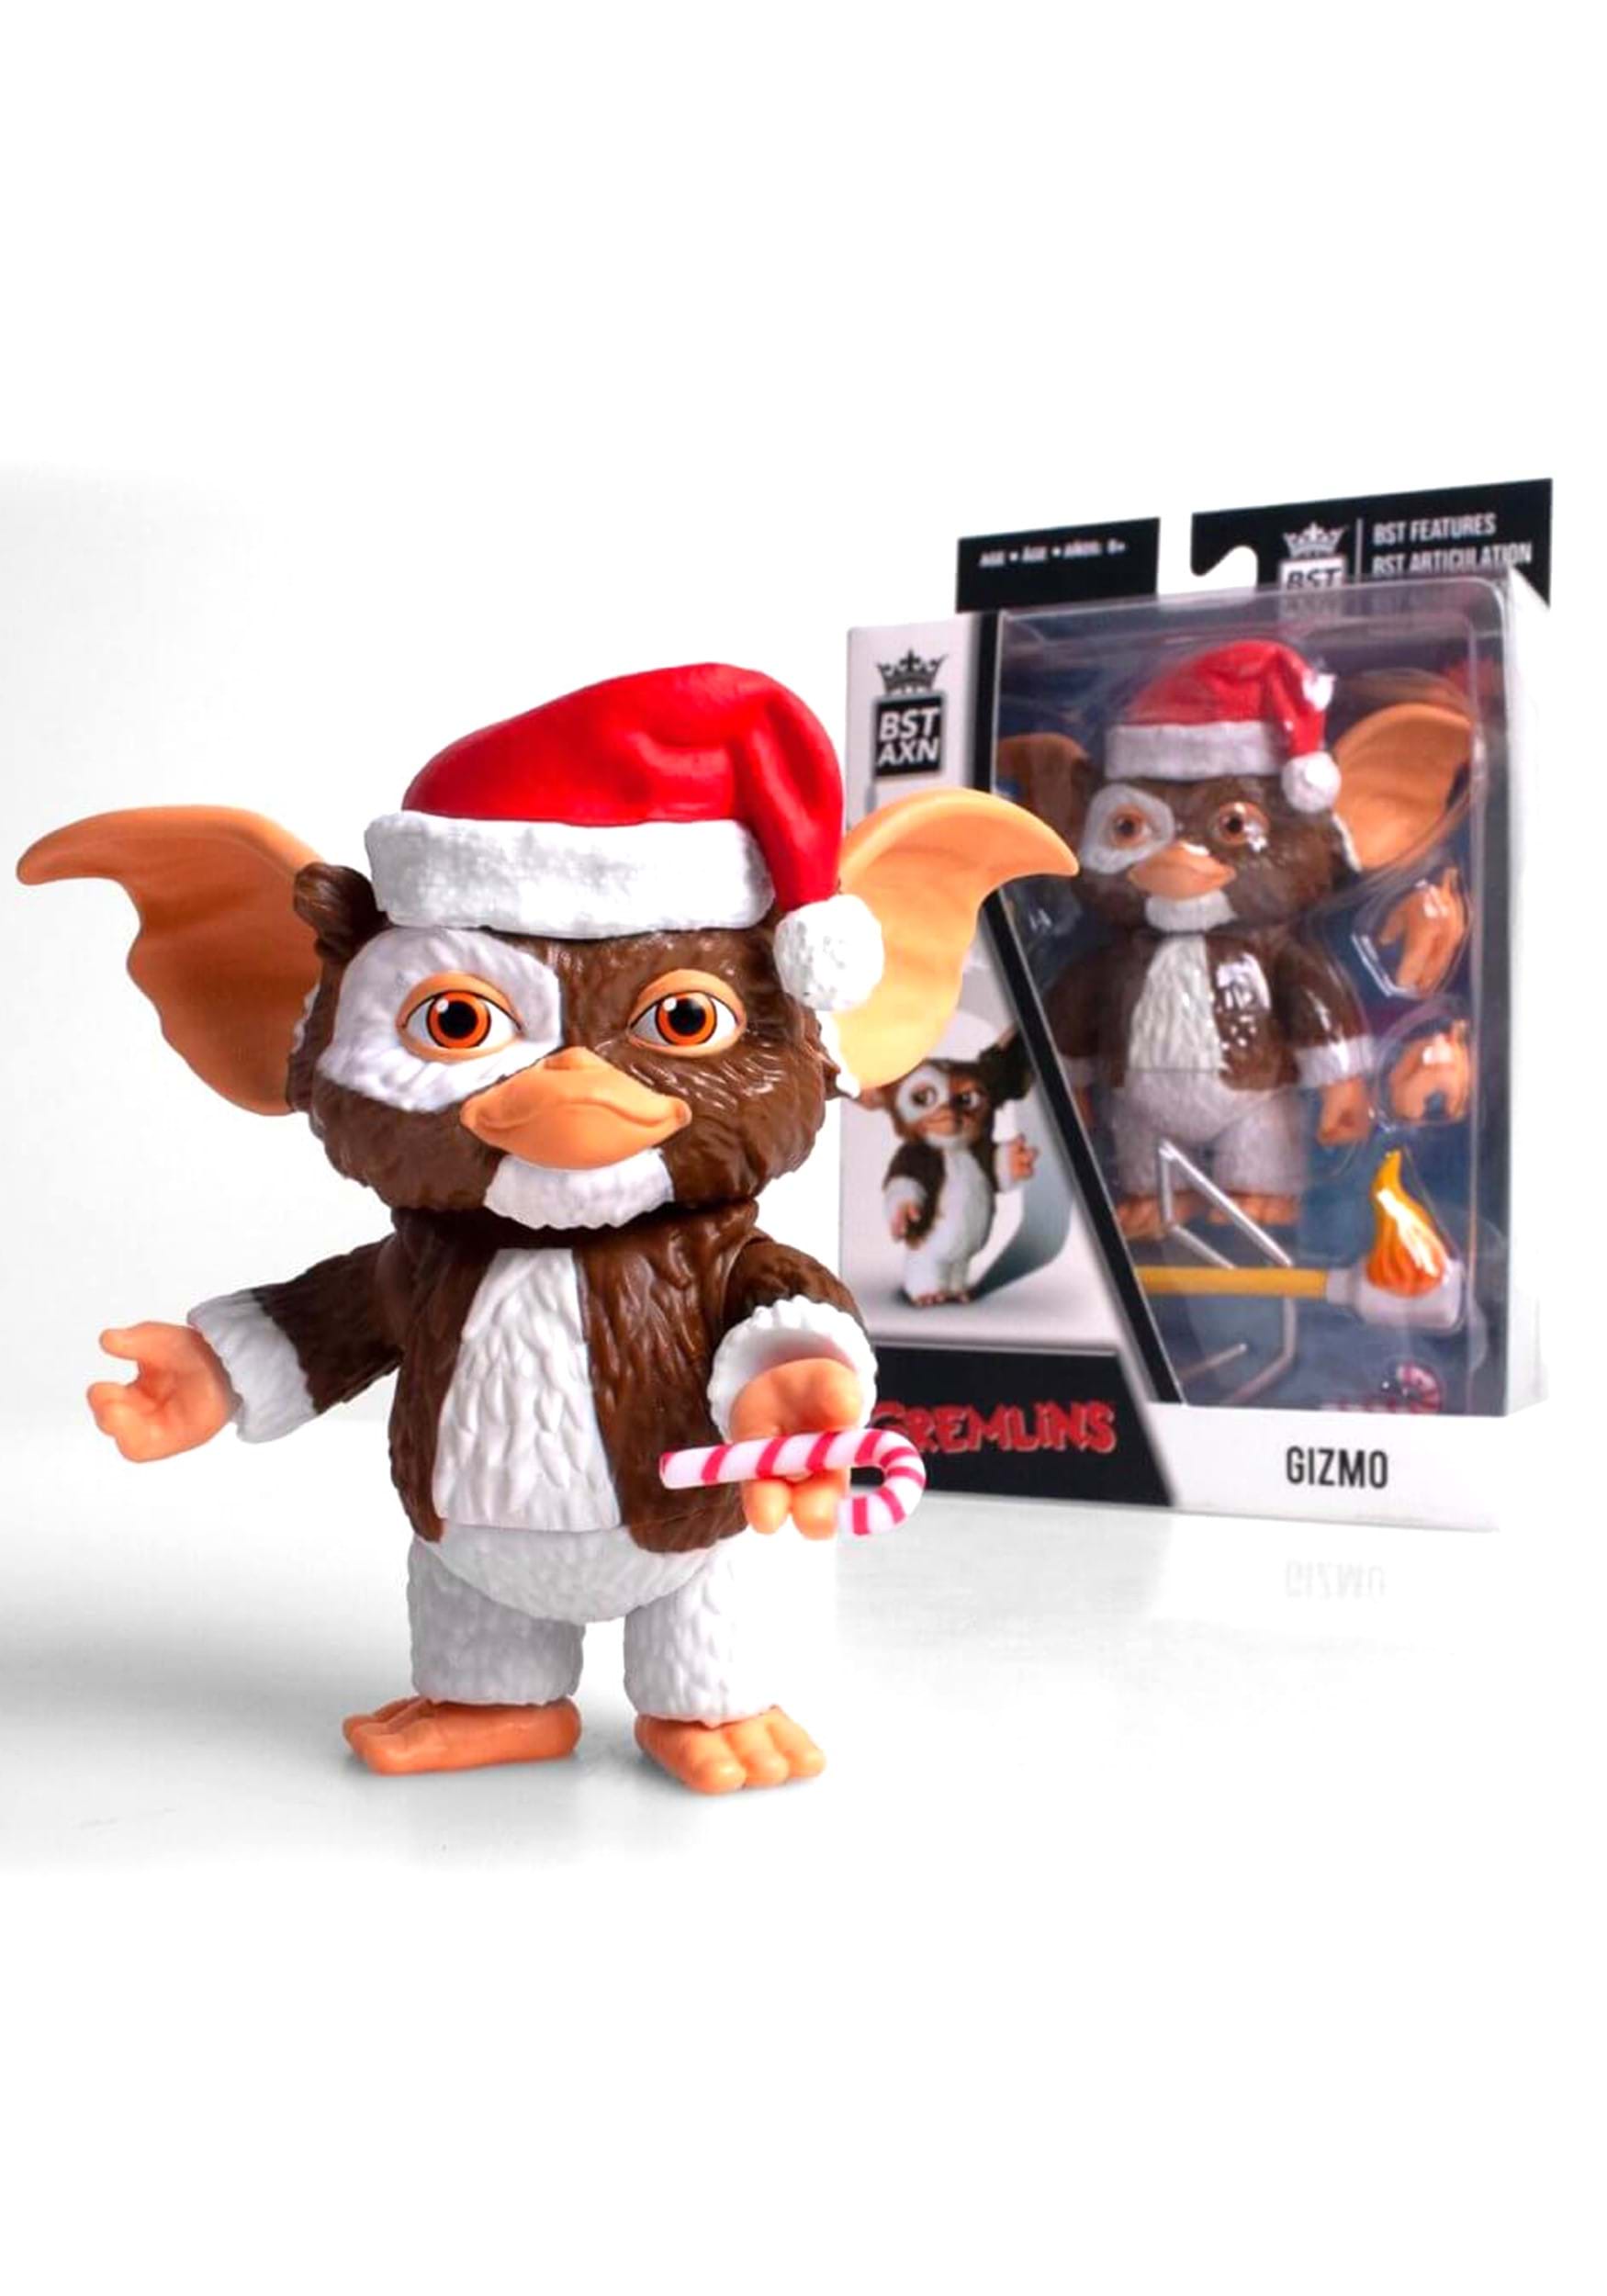 Gremlins Gizmo 1/15 Scale Action Figure from The Loyal Subjects